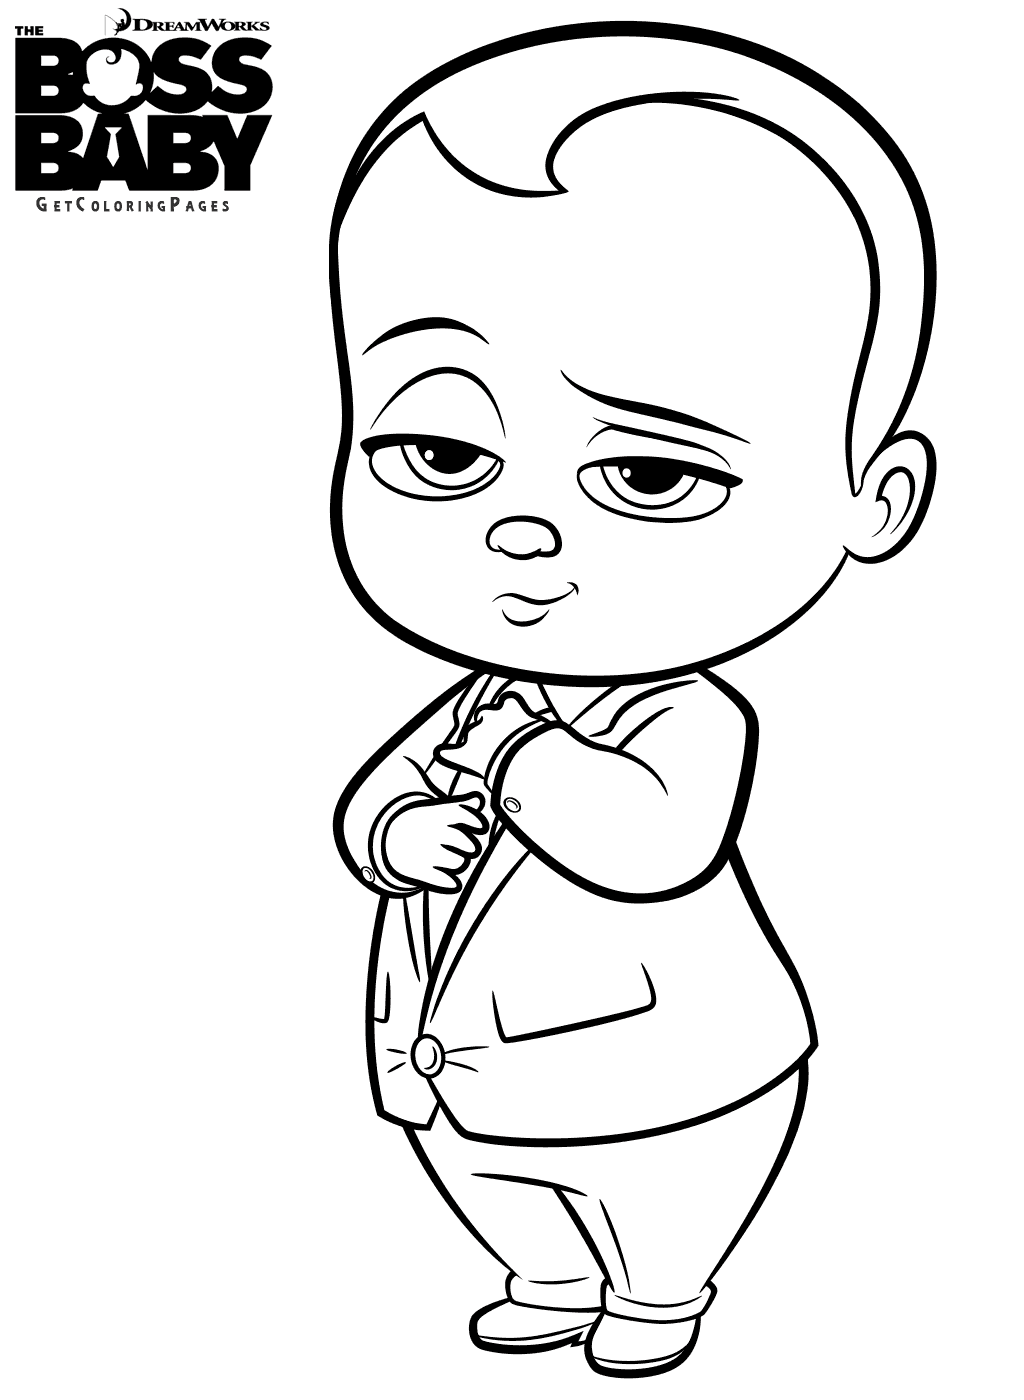 Baby boss free to color for children   Baby Boss Kids Coloring Pages